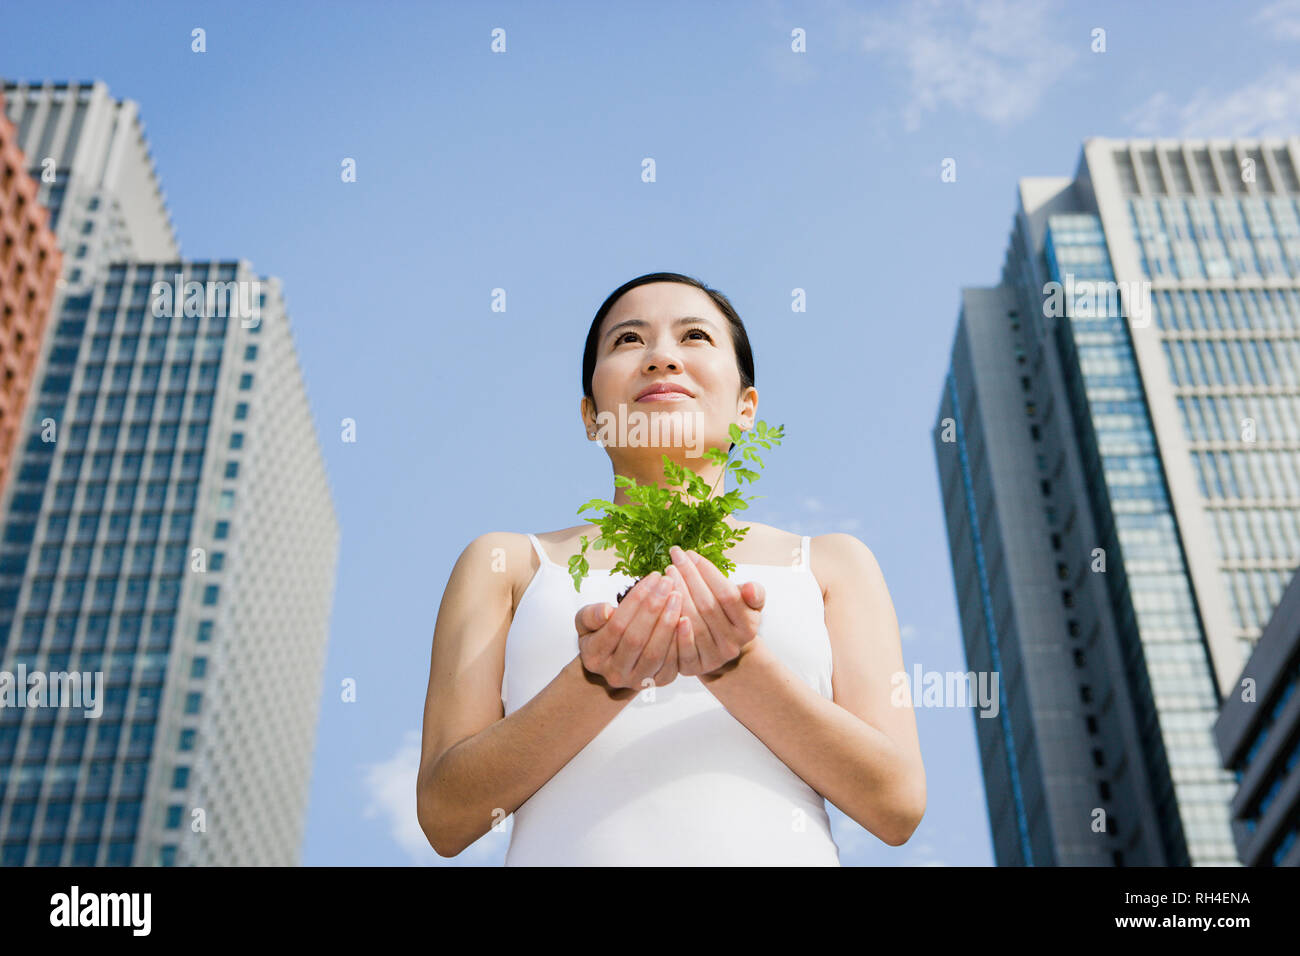 Portrait young woman holding green sapling below city highrises Stock Photo